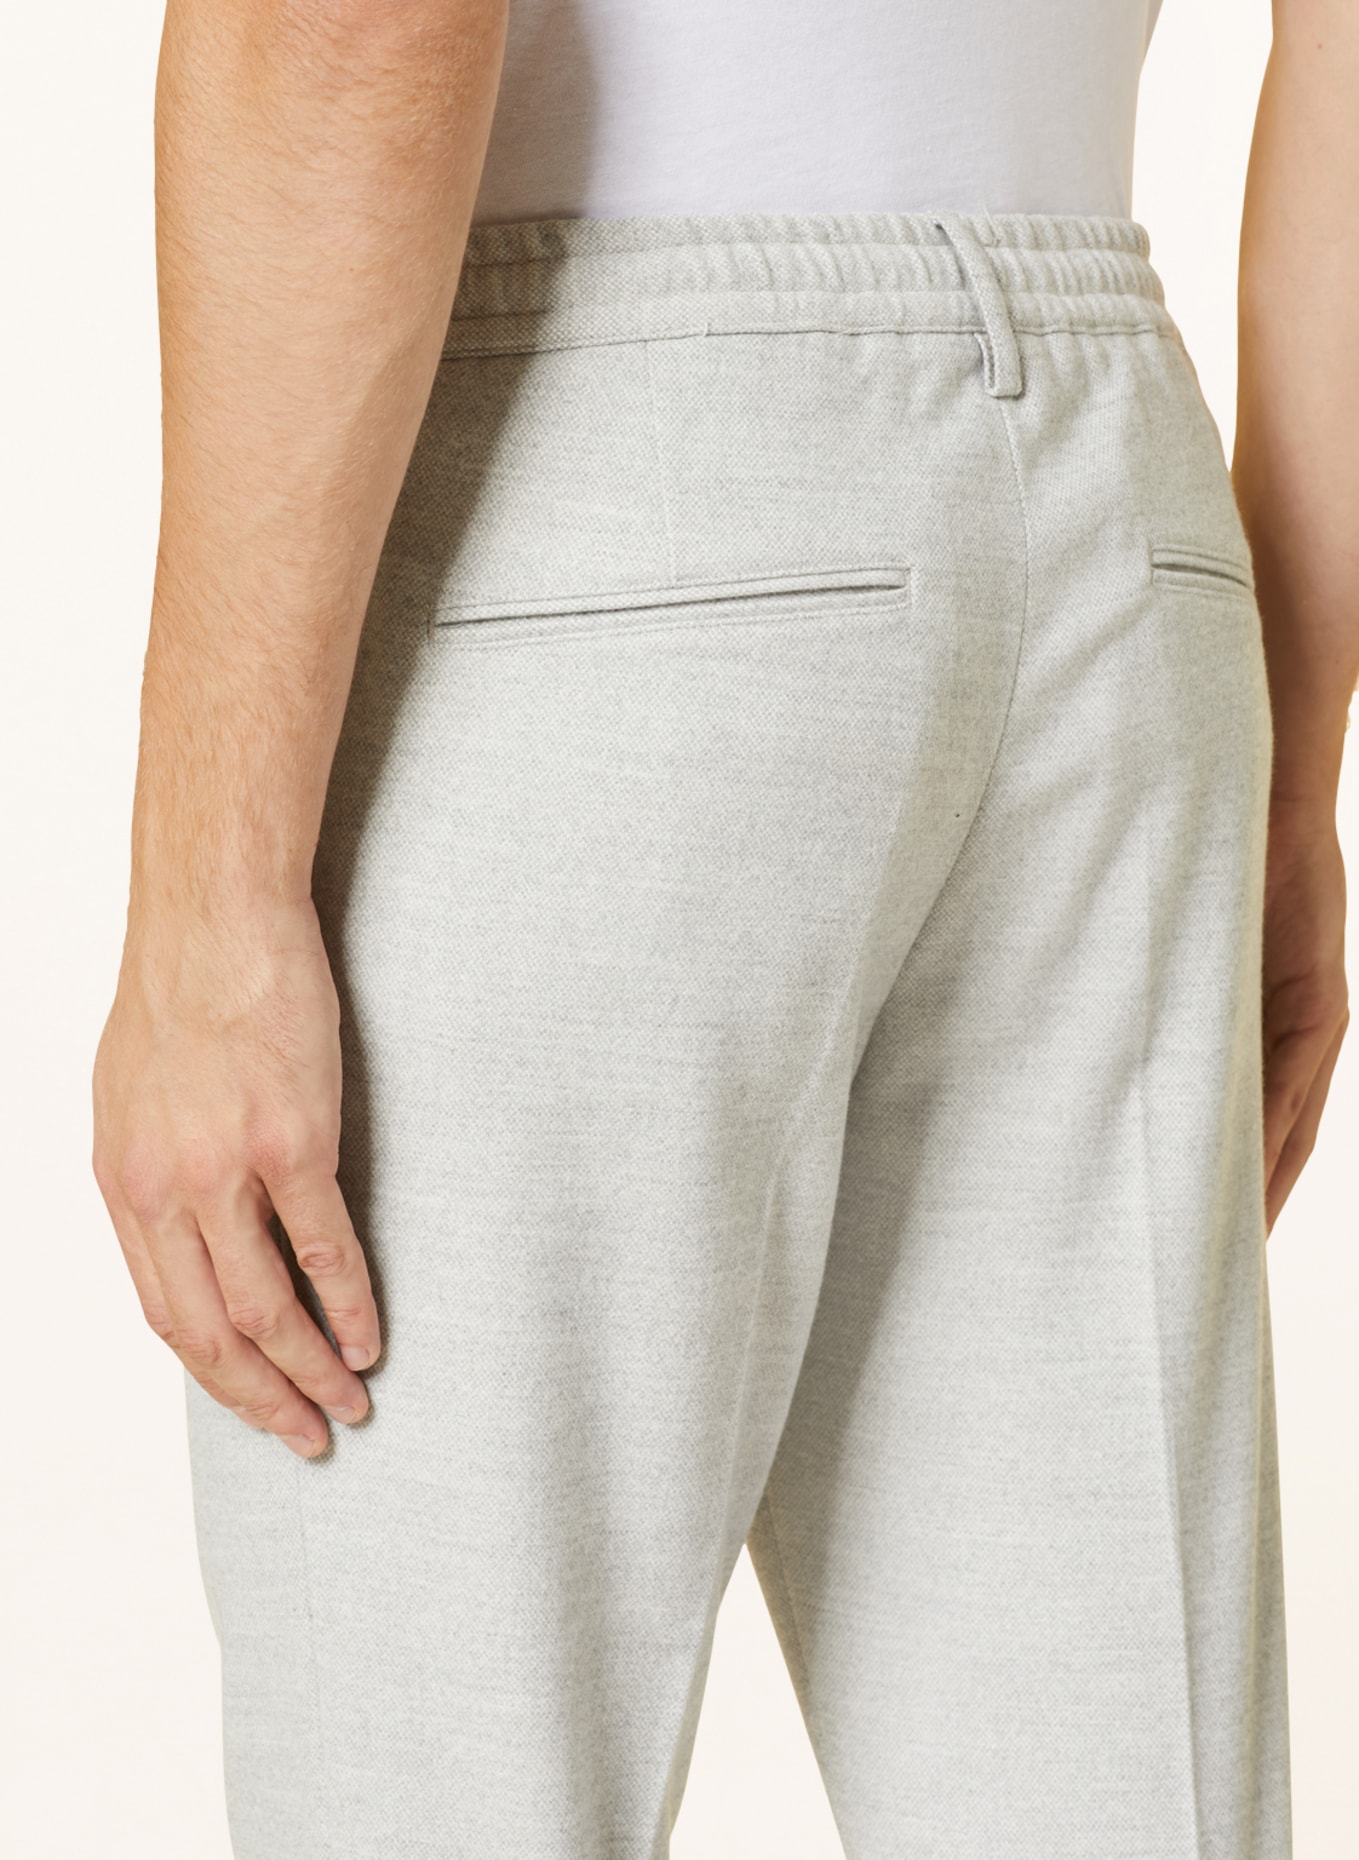 PROFUOMO Pants in jogger style, Color: LIGHT GRAY (Image 5)